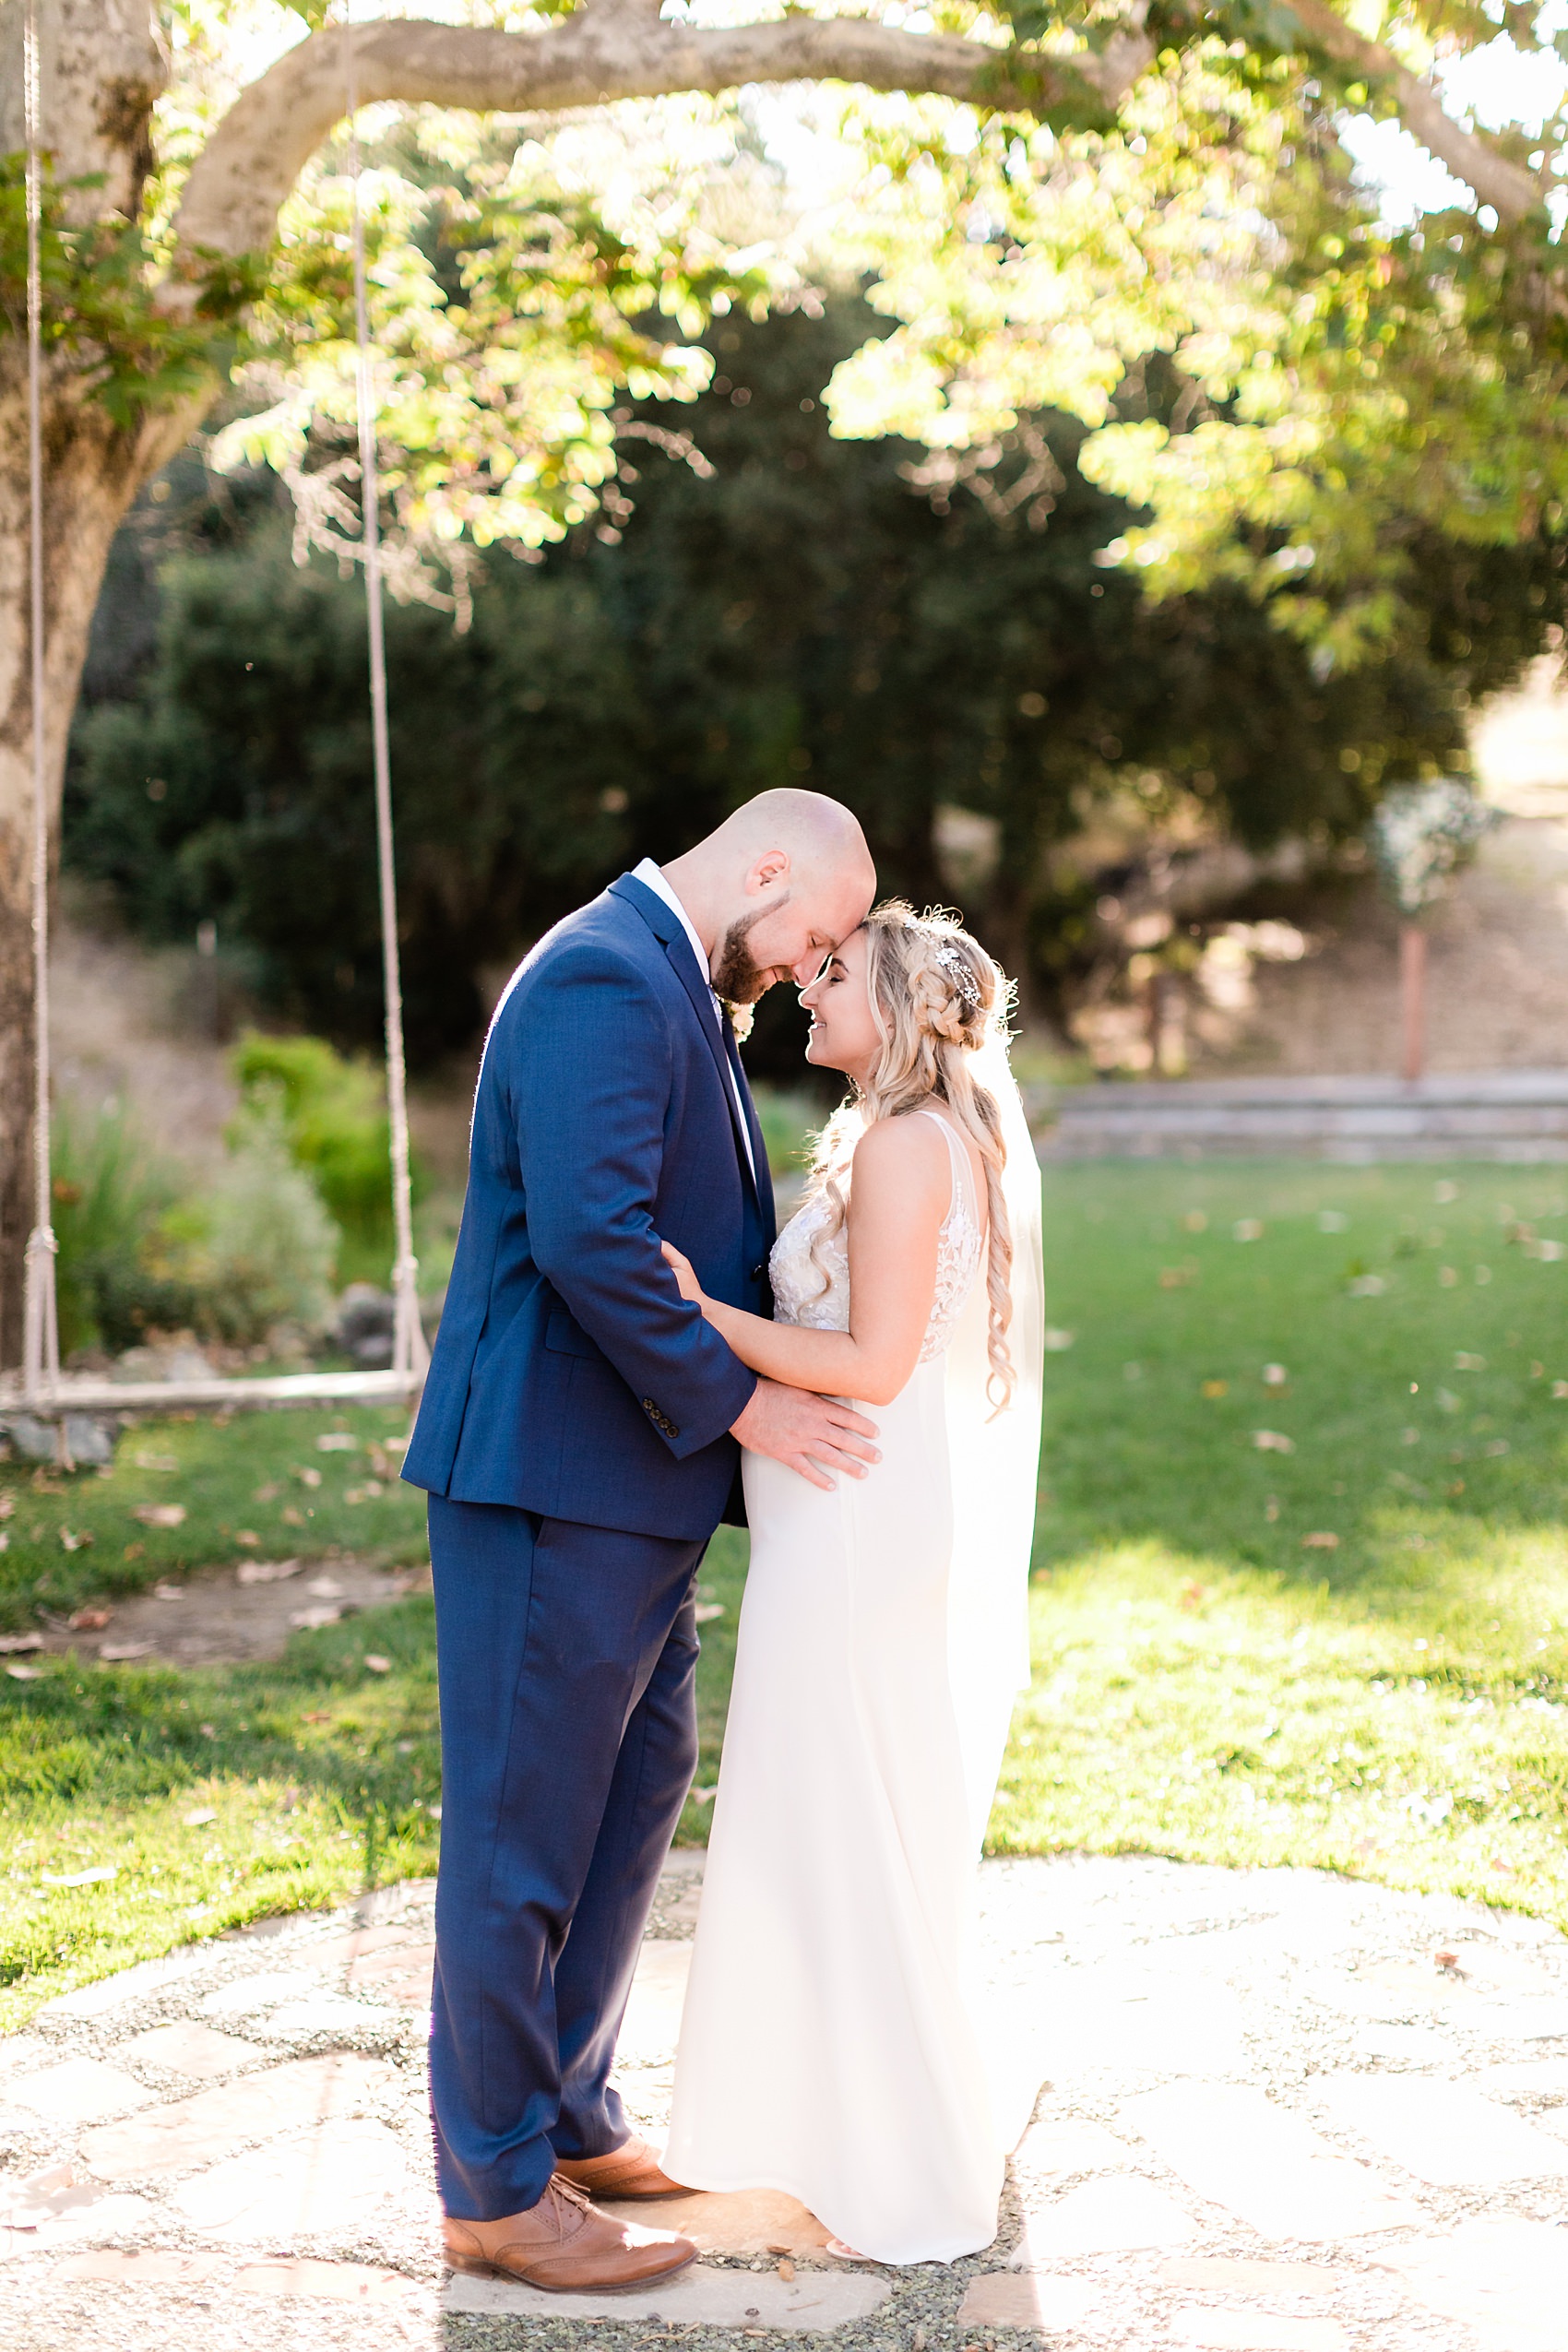 Filipponi Ranch wedding photographed by Tayler Enerle